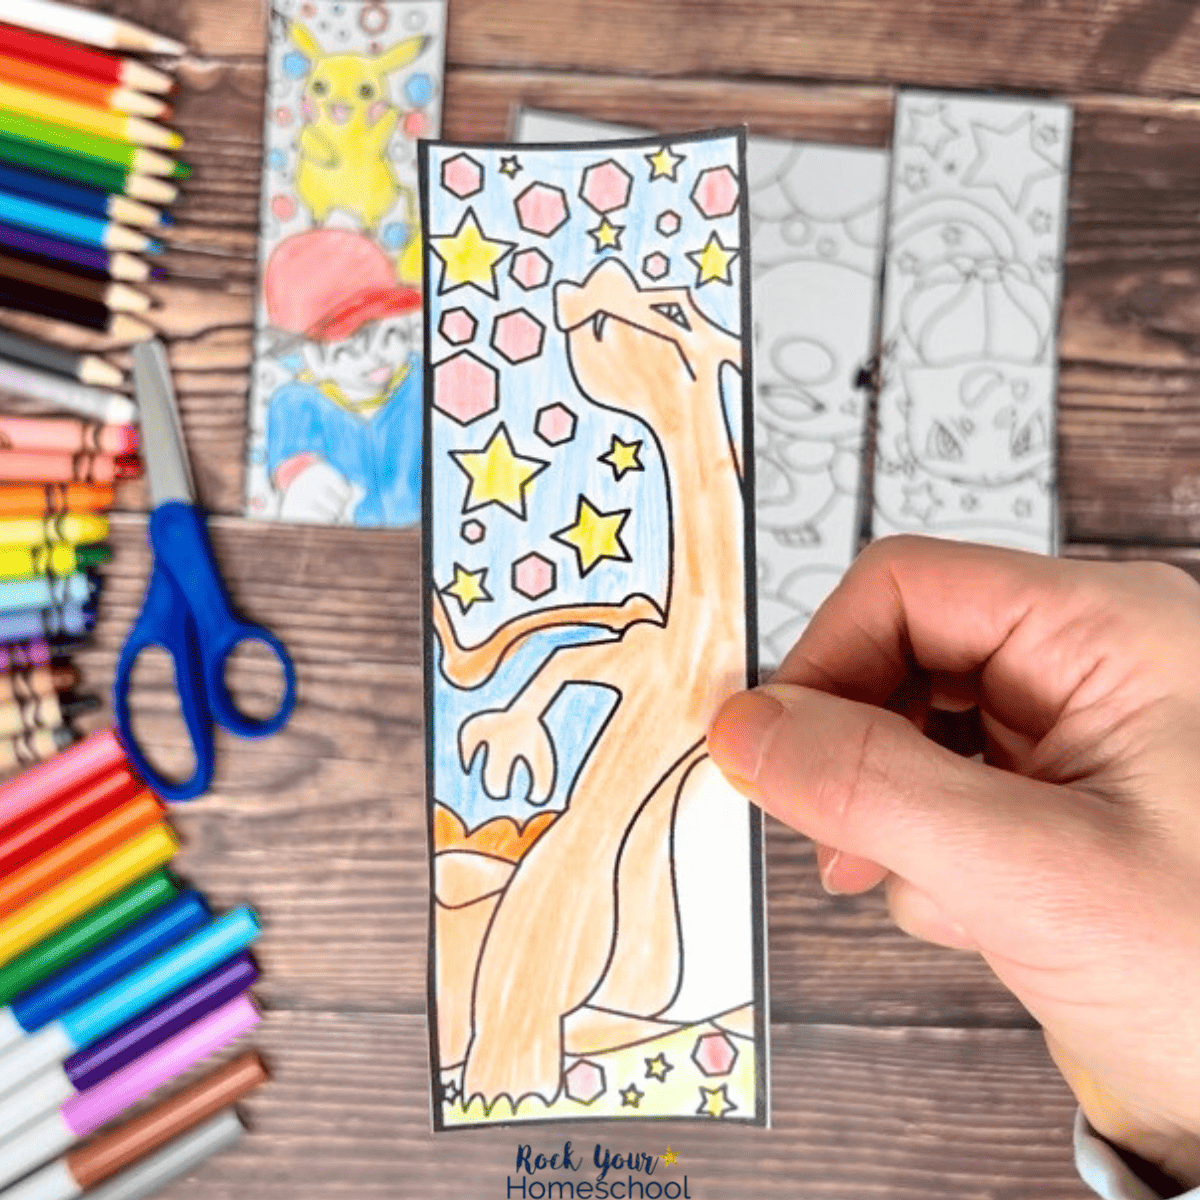 Woman holding Charizard bookmarks with other examples of free printable Pokemon bookmarks with markers, crayons, color pencils, and scissors in background.